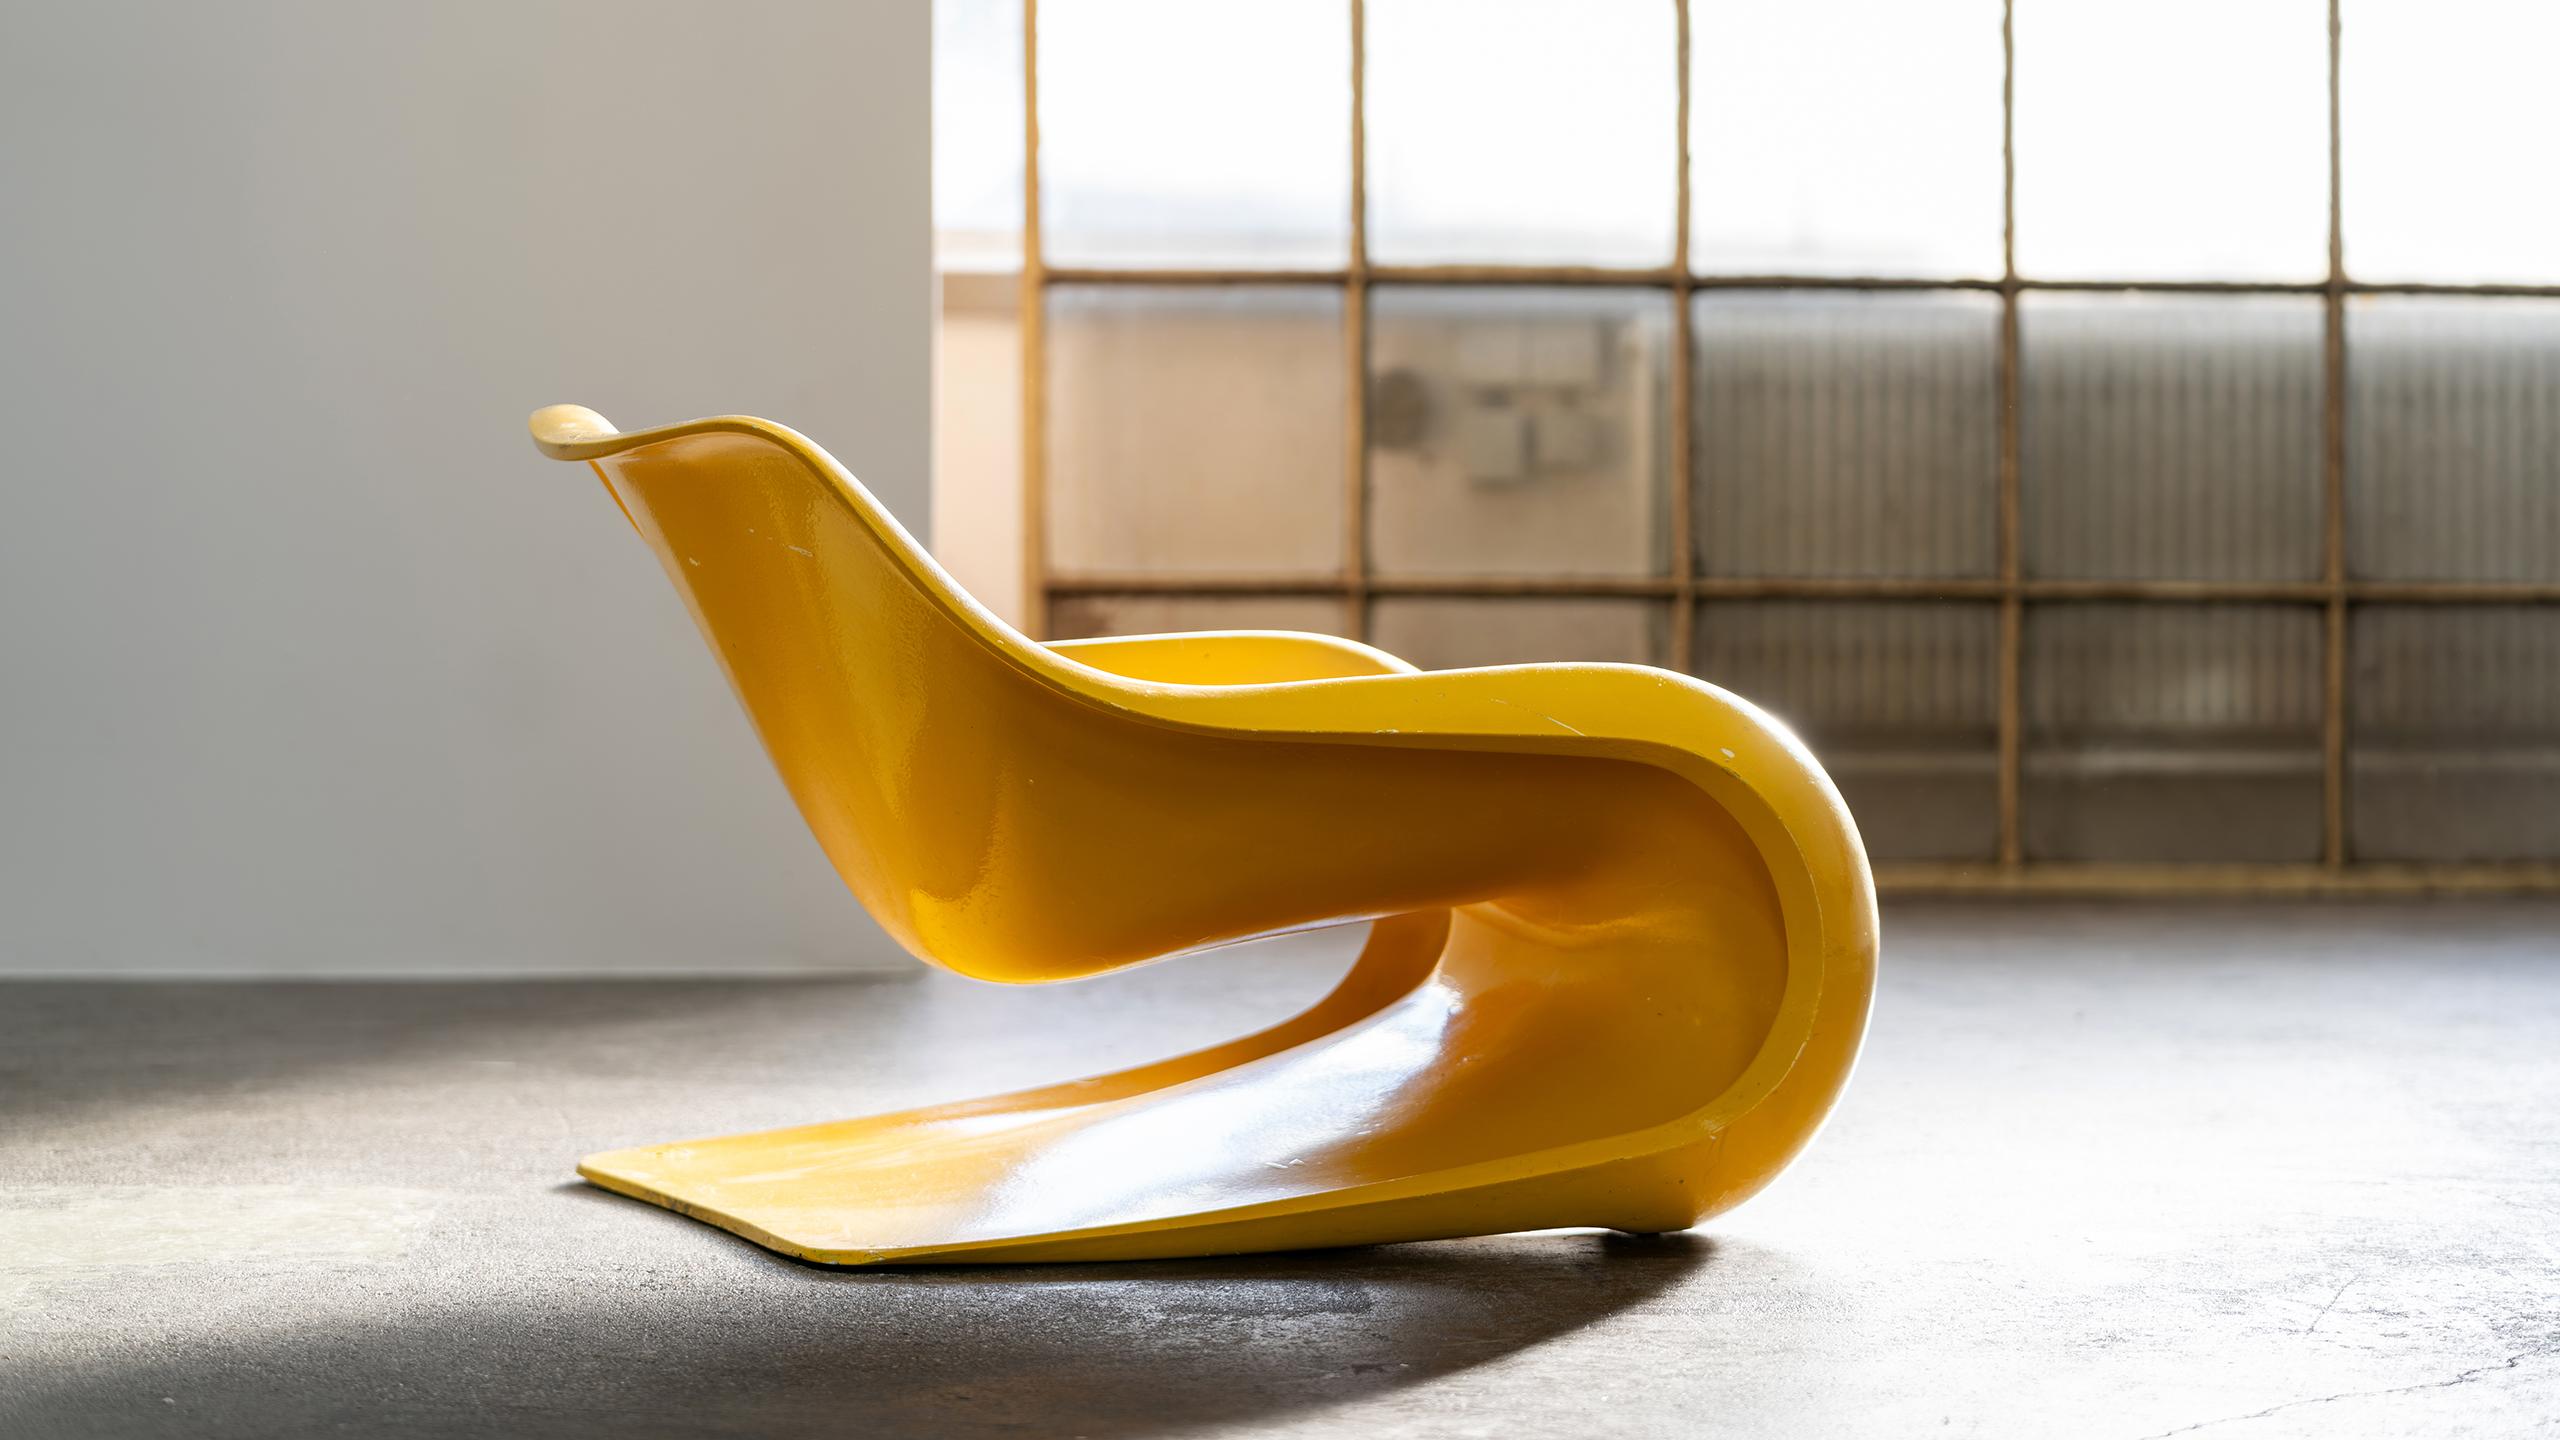 Targa Chair by Klaus Uredat, 19709 for Horn Collection, Germany - Organic Design 1